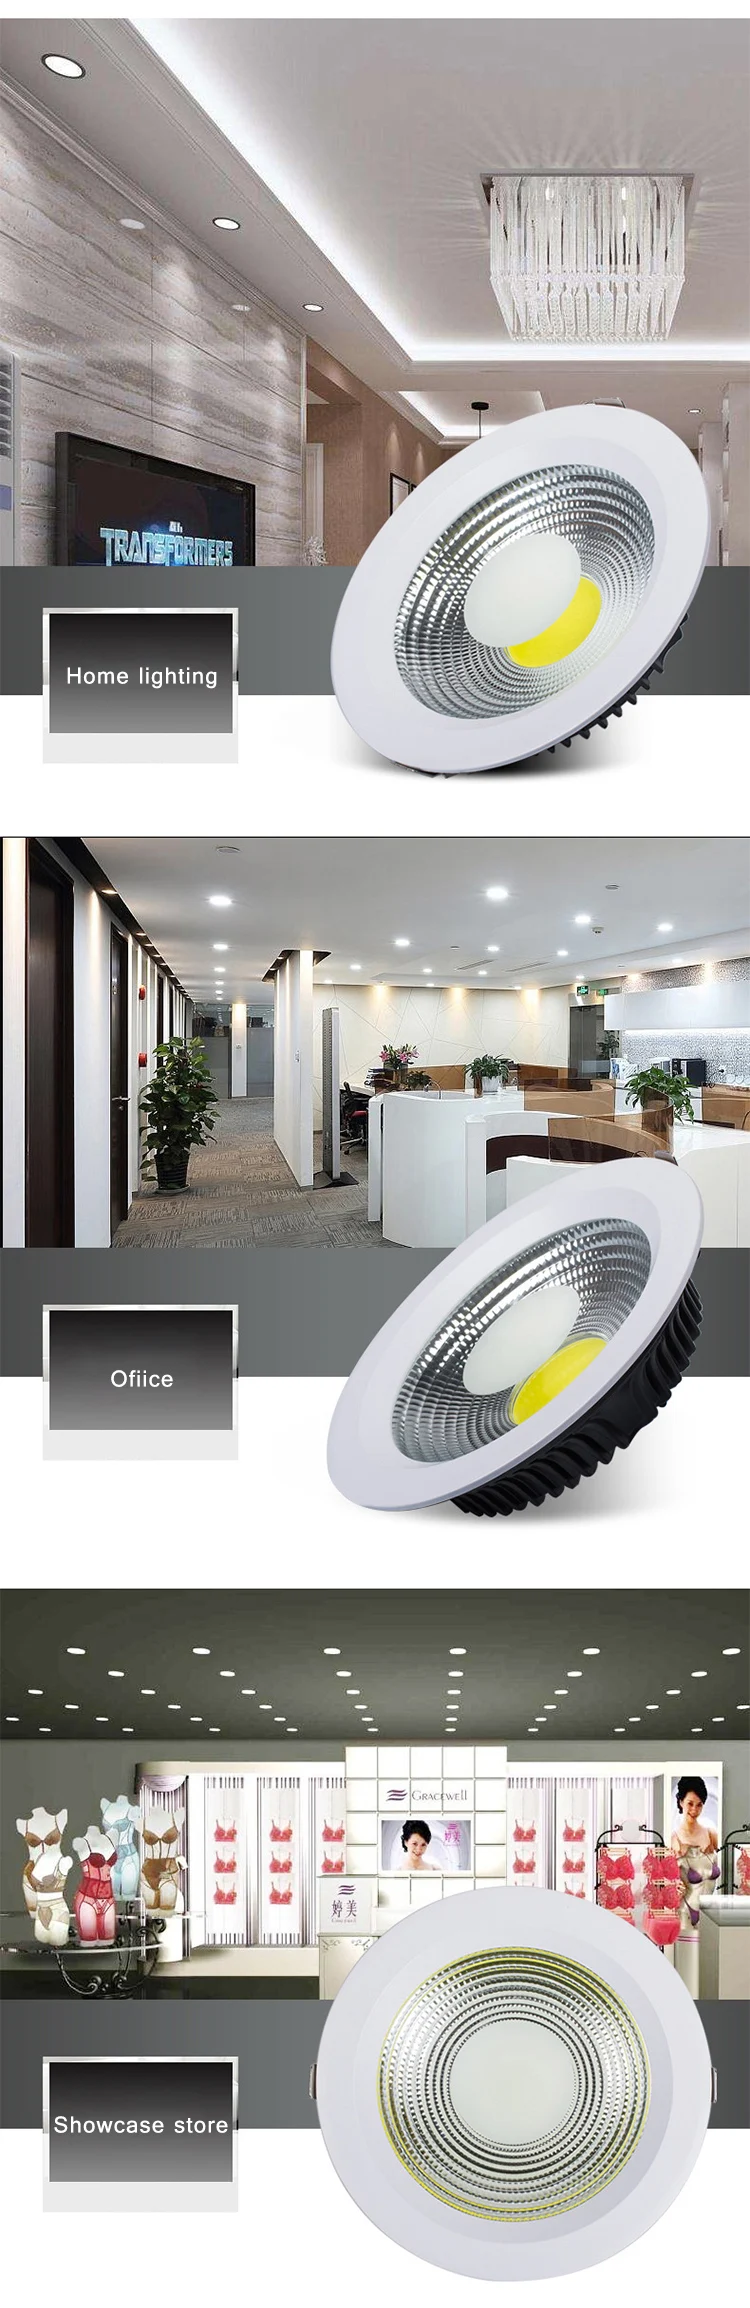 China Zhongshan Recessed Celling Led down light 7w with Best Price